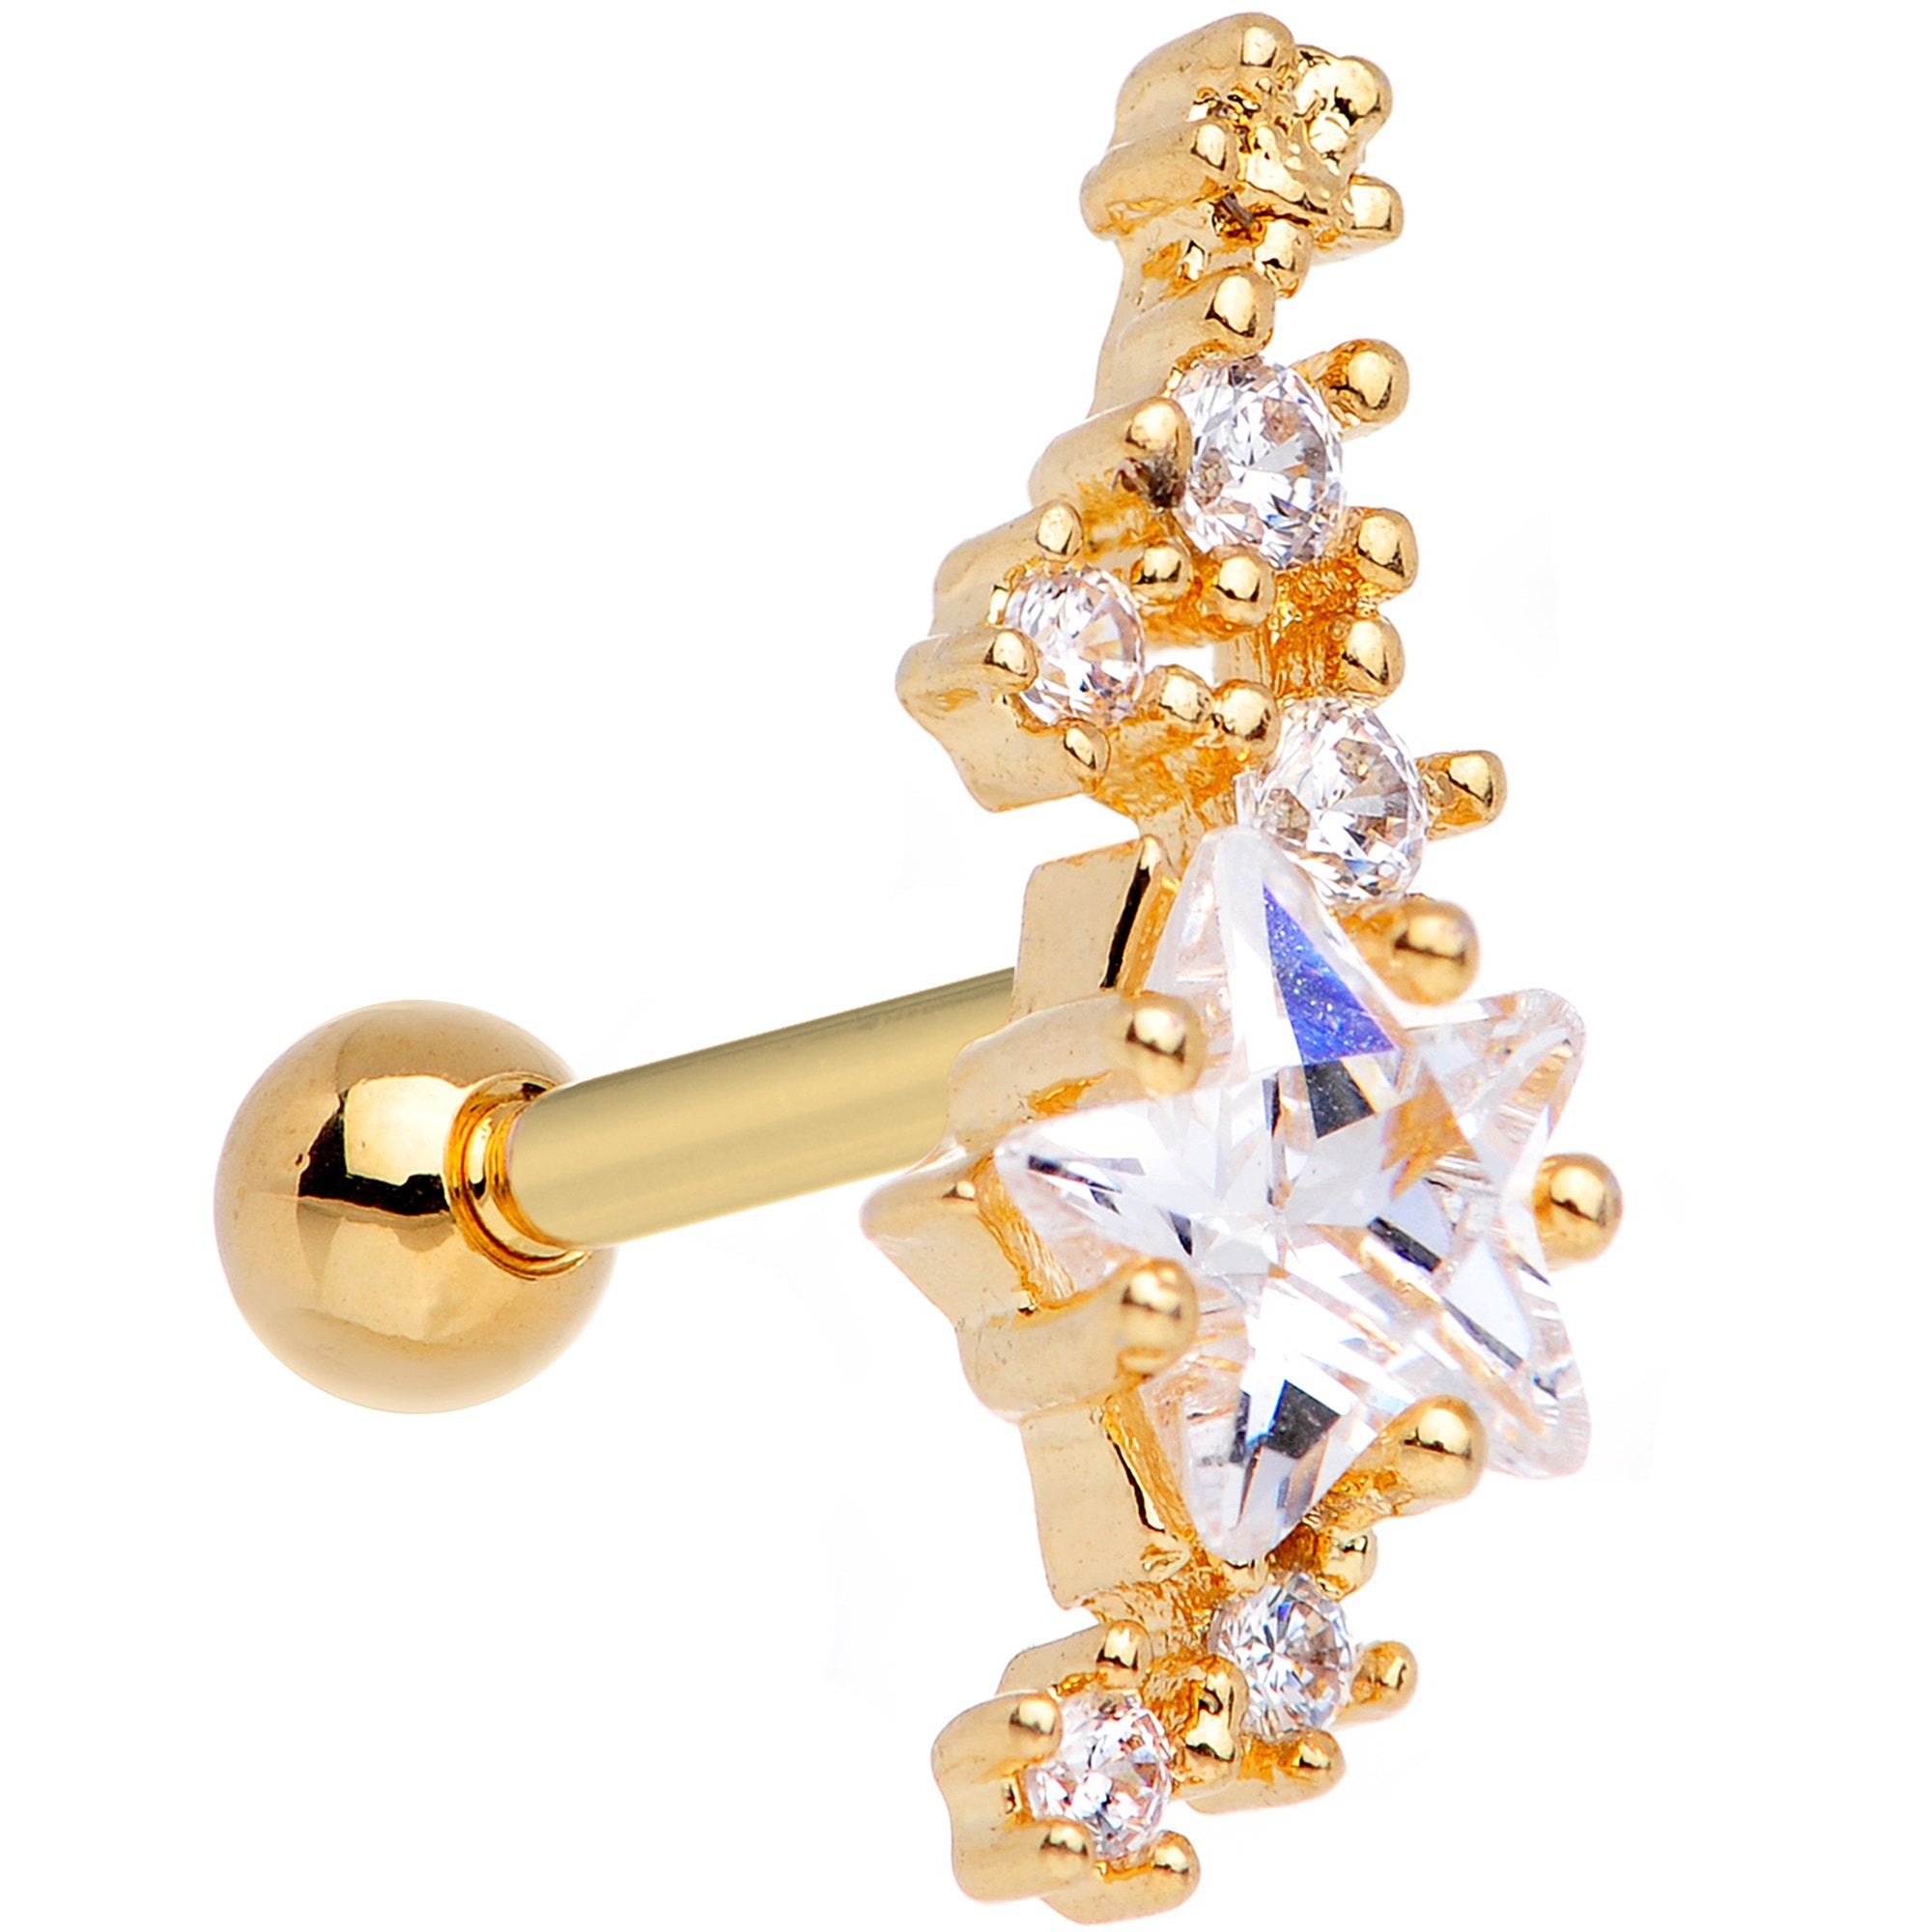 Clear CZ Gem Gold Tone Plated Shooting Star Cartilage Tragus Earring